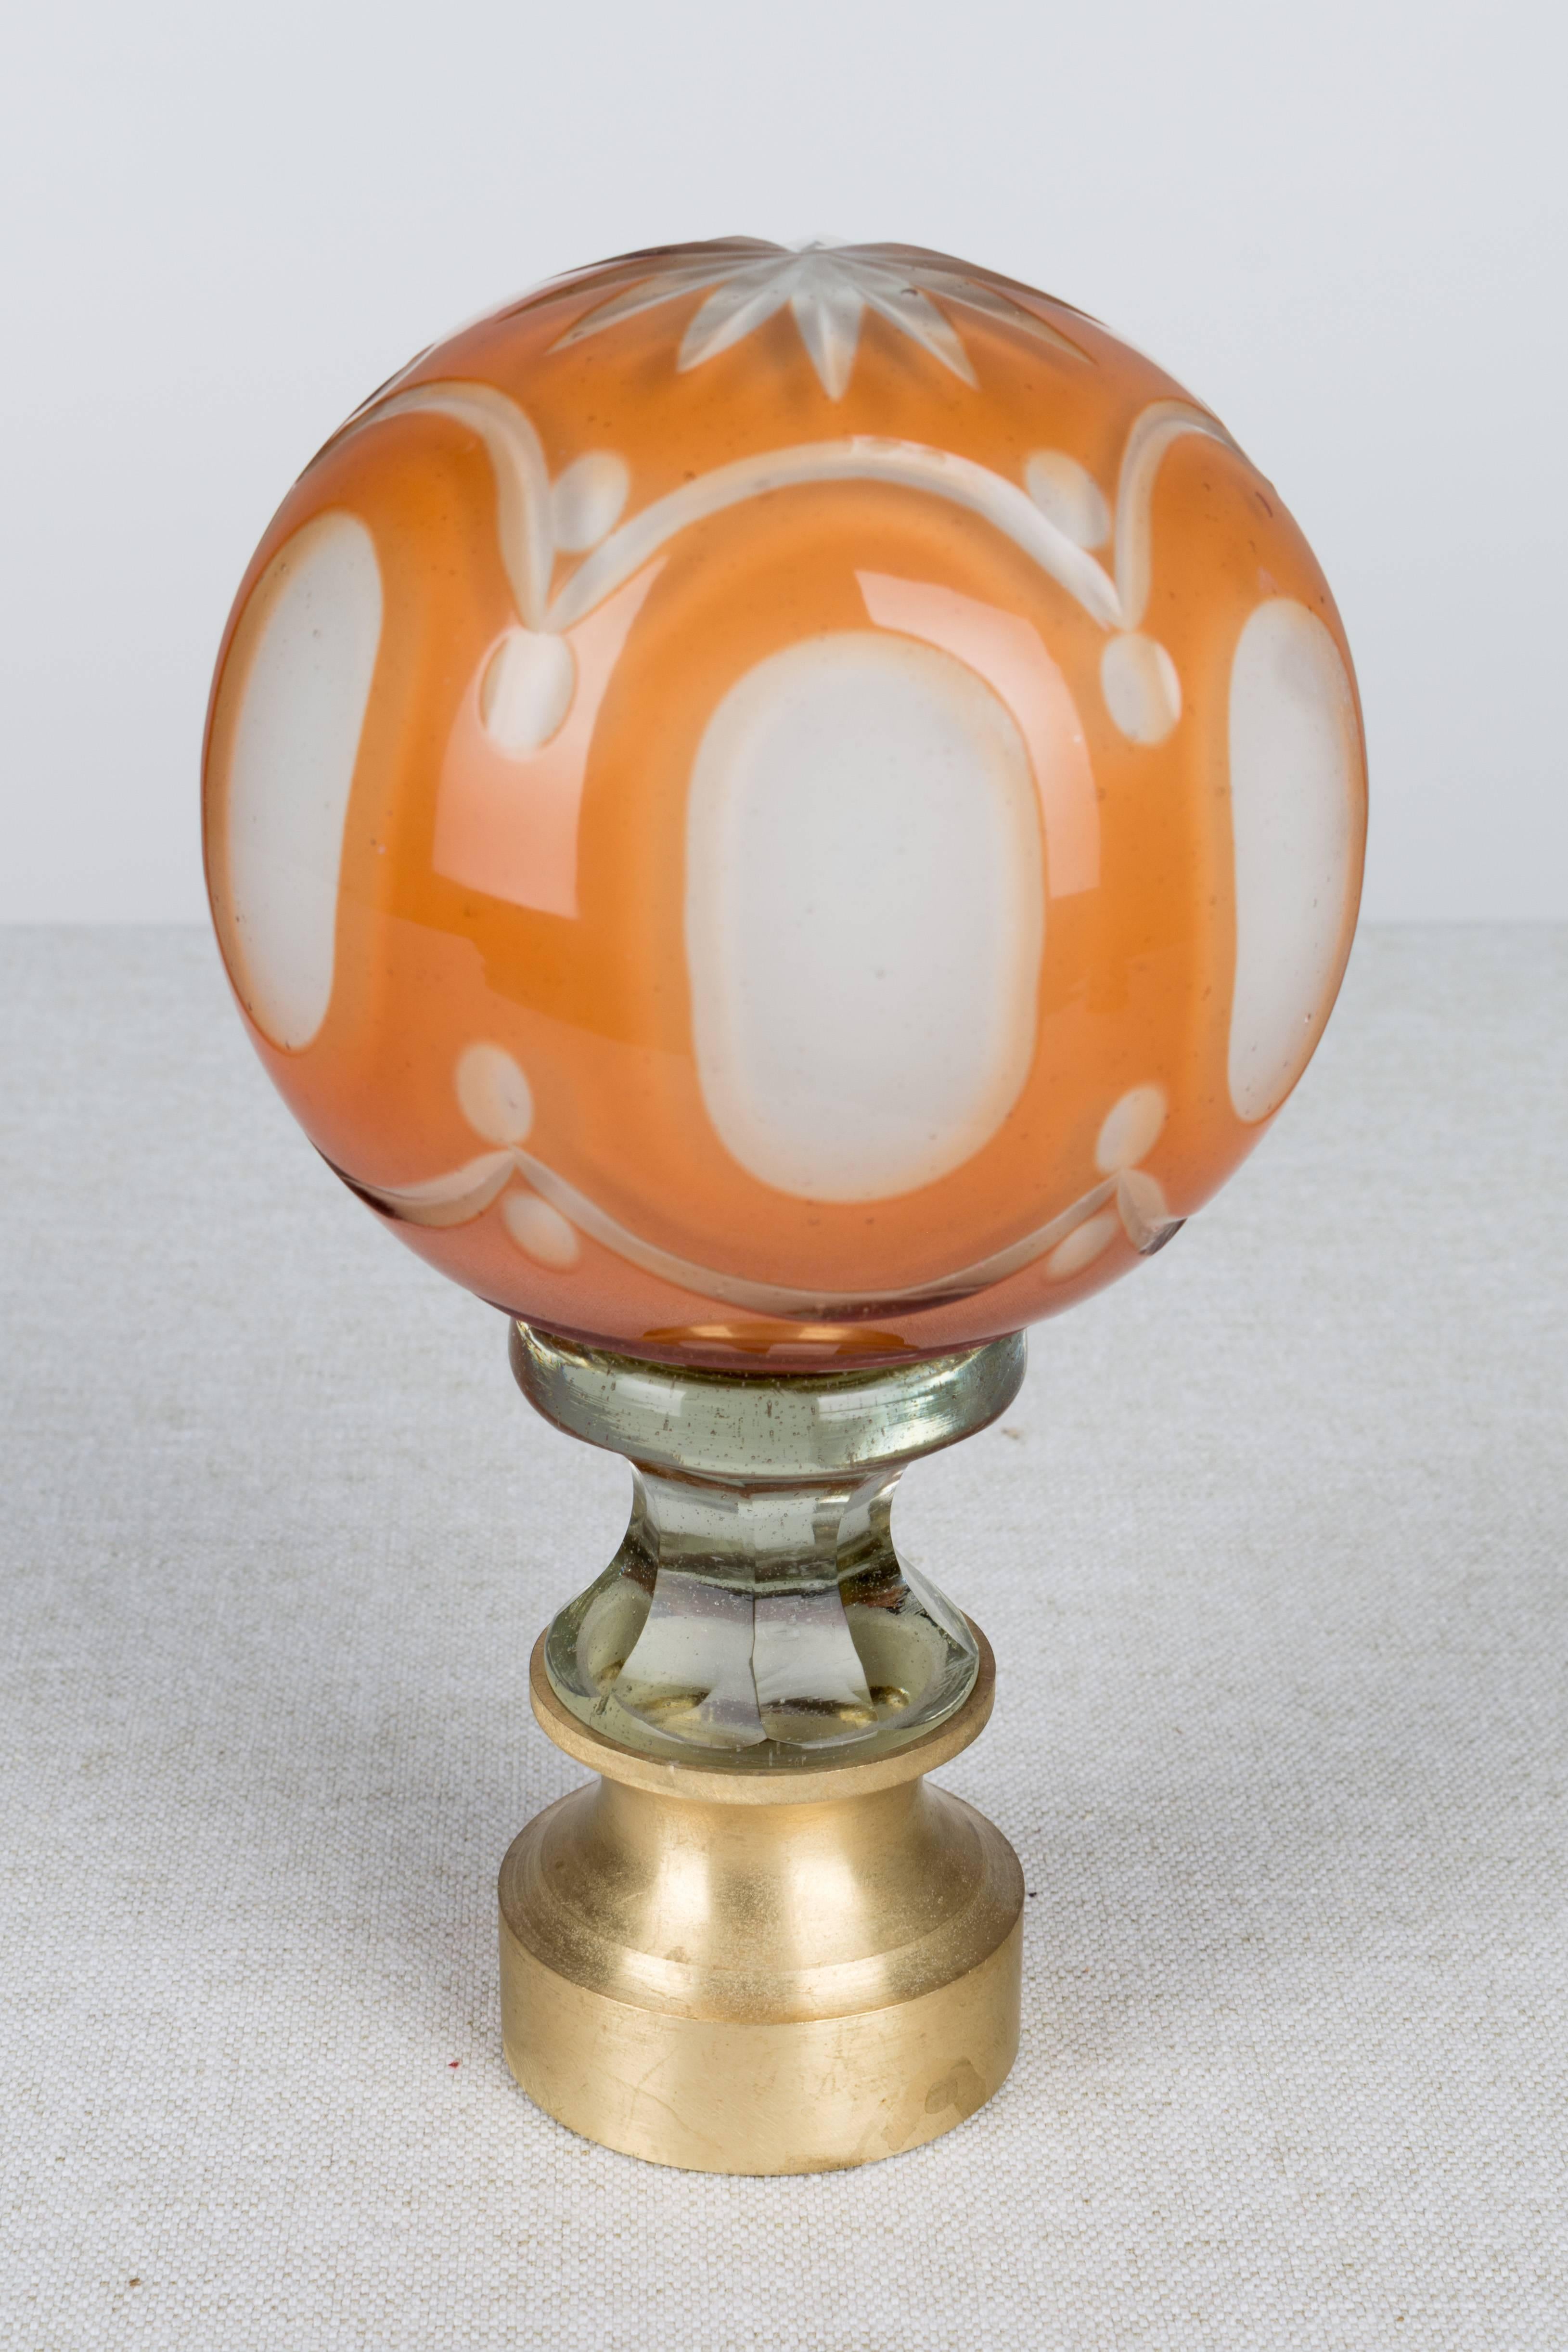 An early 20th Century French glass newel post finial or boule d'escalier. Made of two layers of cased glass with the orange glass surface cut back to the white glass underneath. Brass hardware base. These wonderful finials were used as decorative